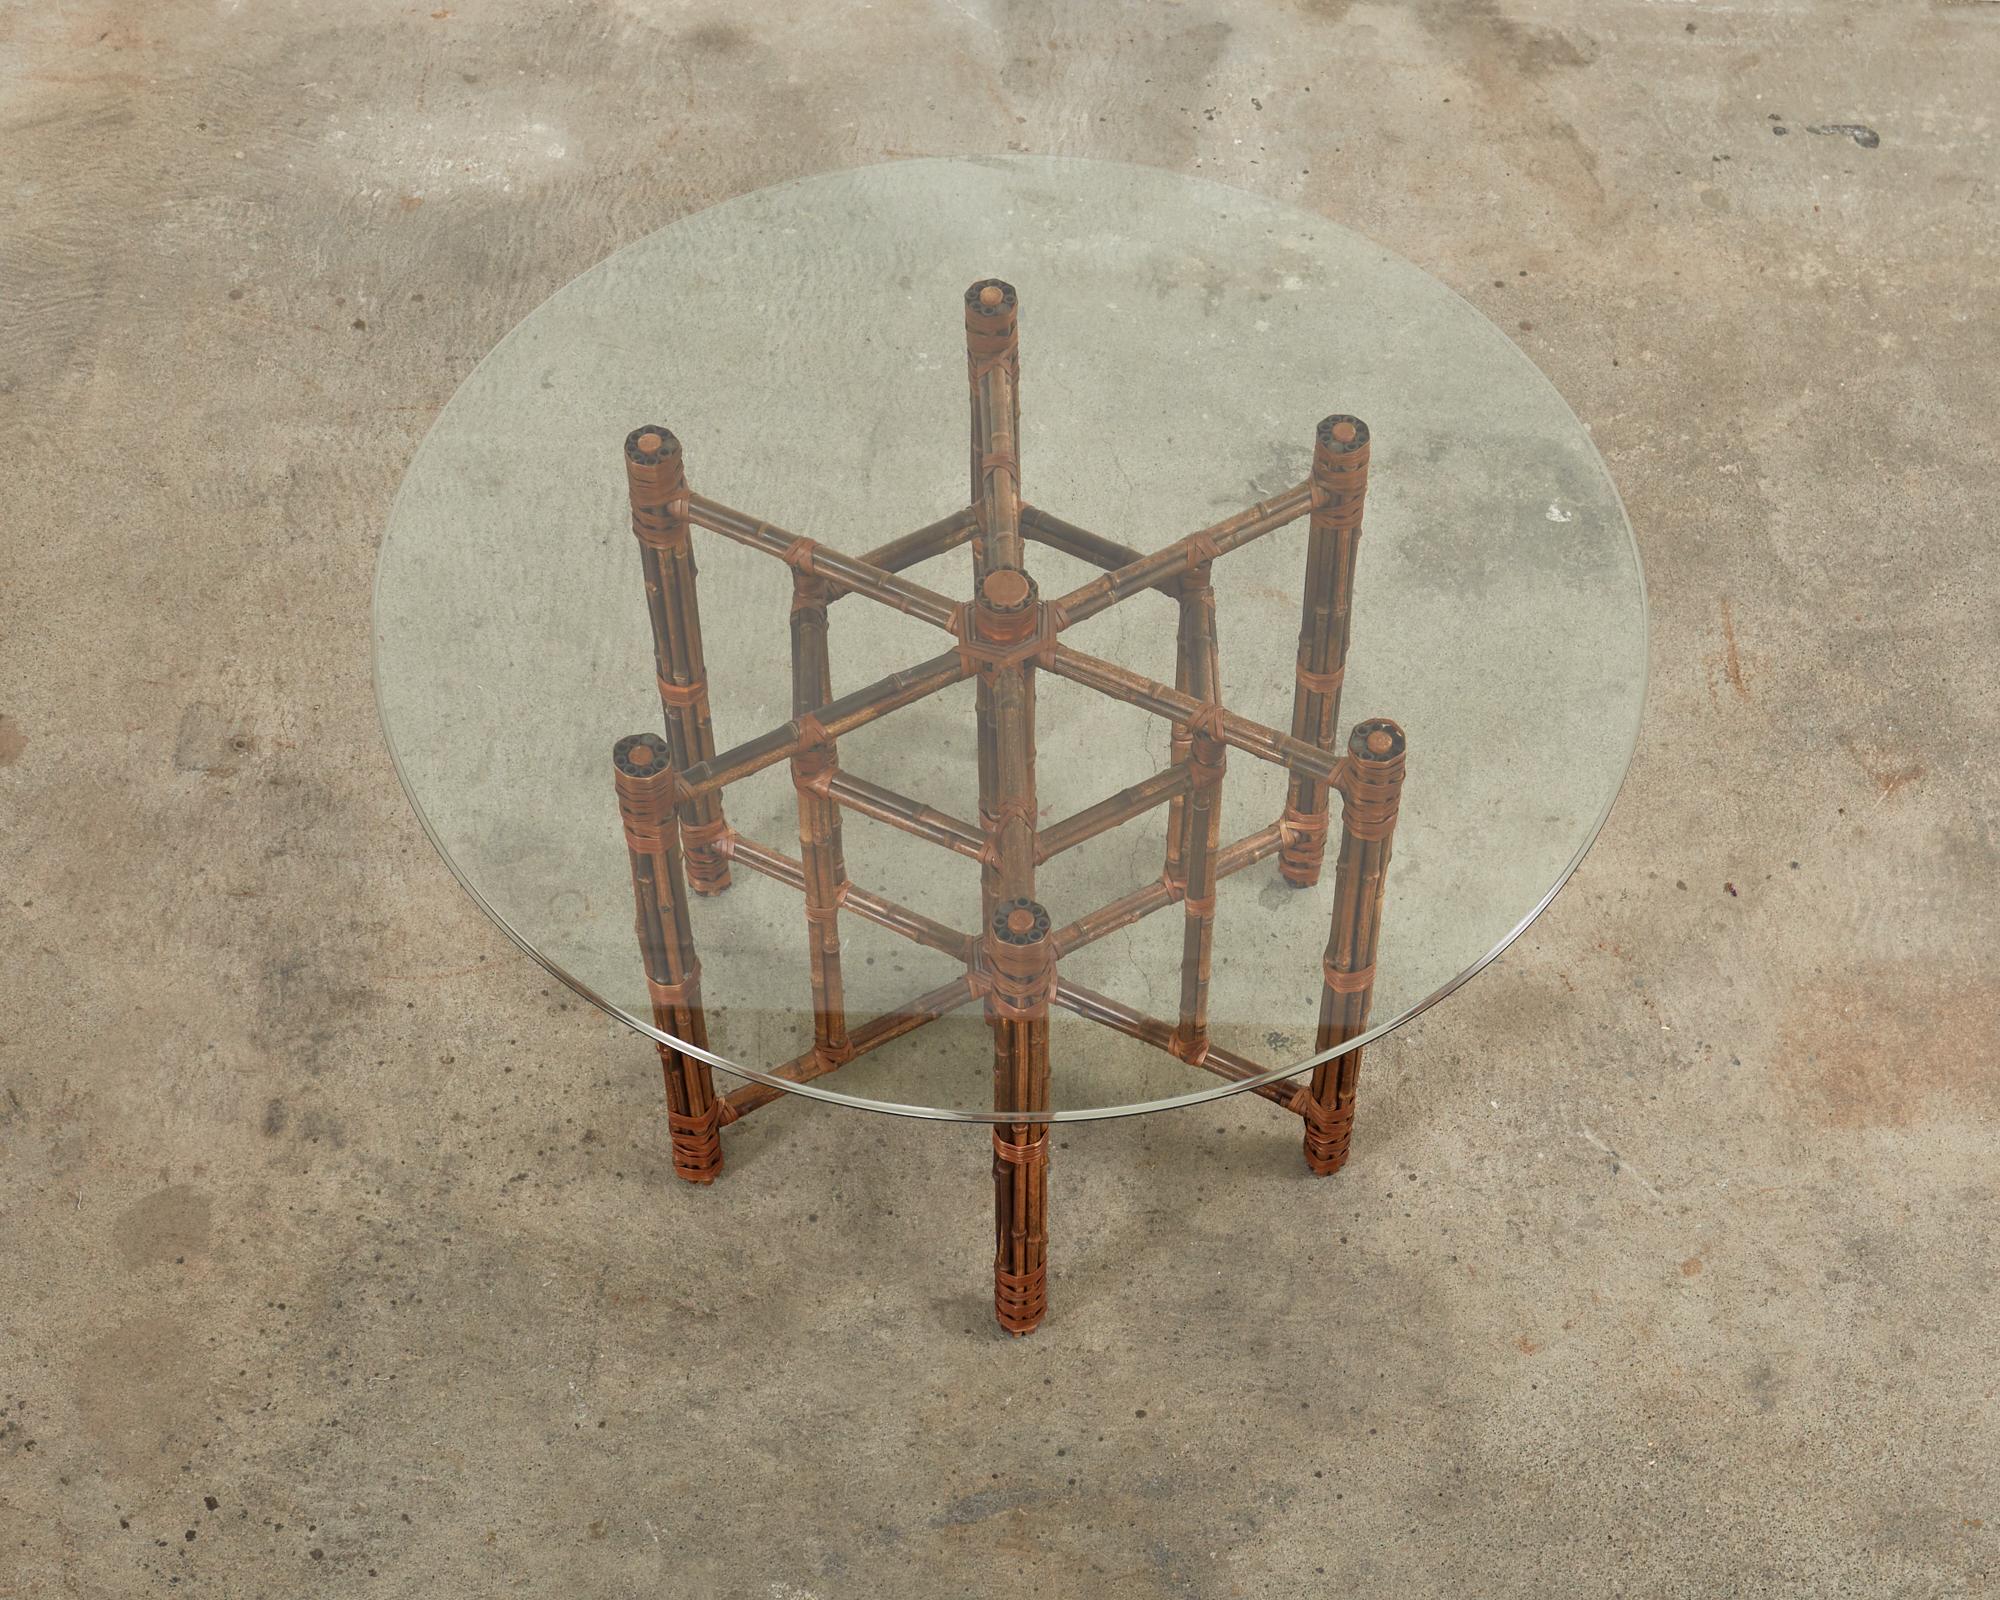 Hand-Crafted McGuire Organic Modern Hexagonal Bamboo Rattan Dining Table